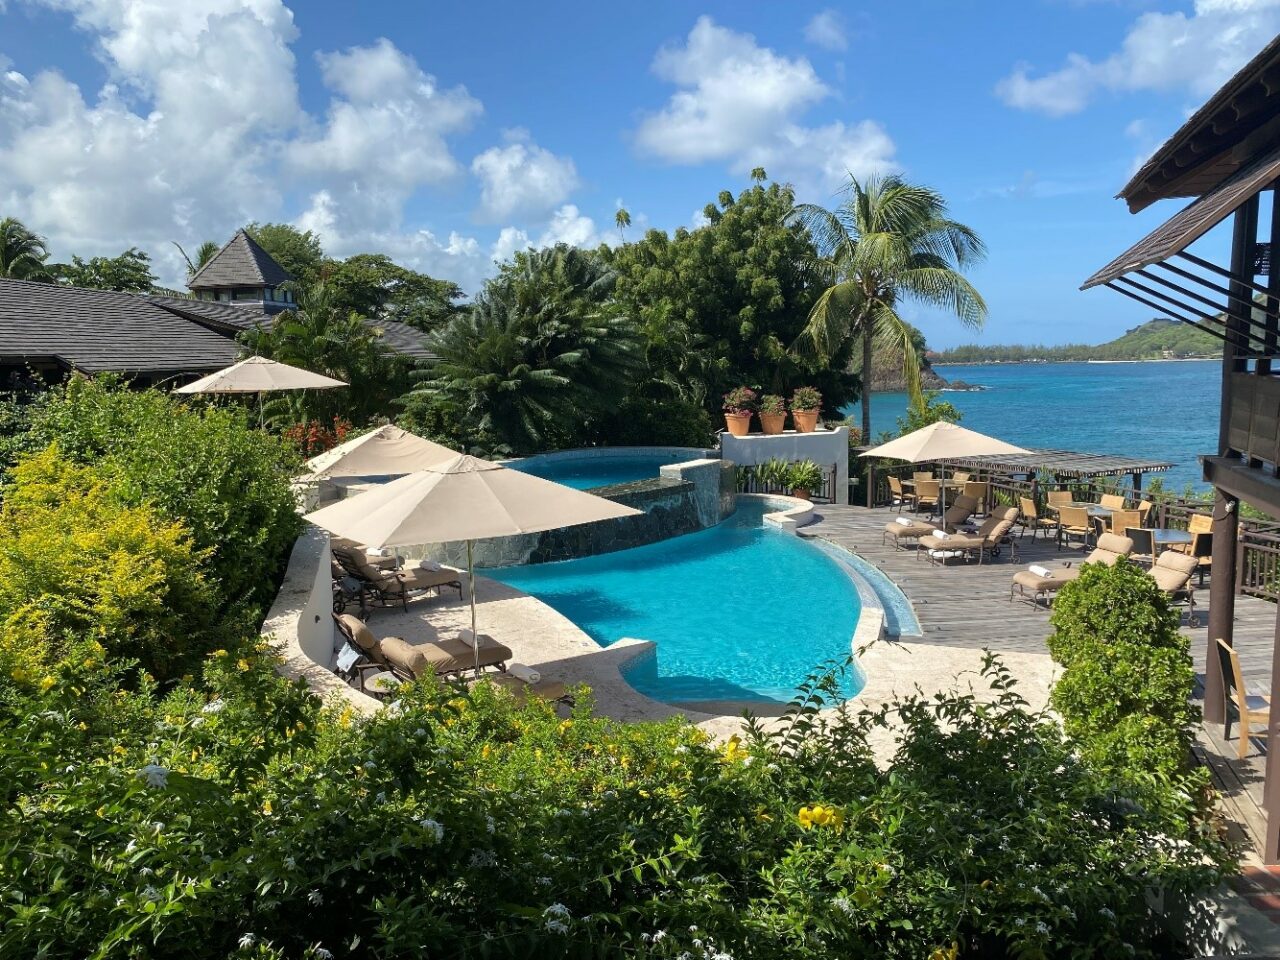 Pool at Cap Maison in St Lucia 